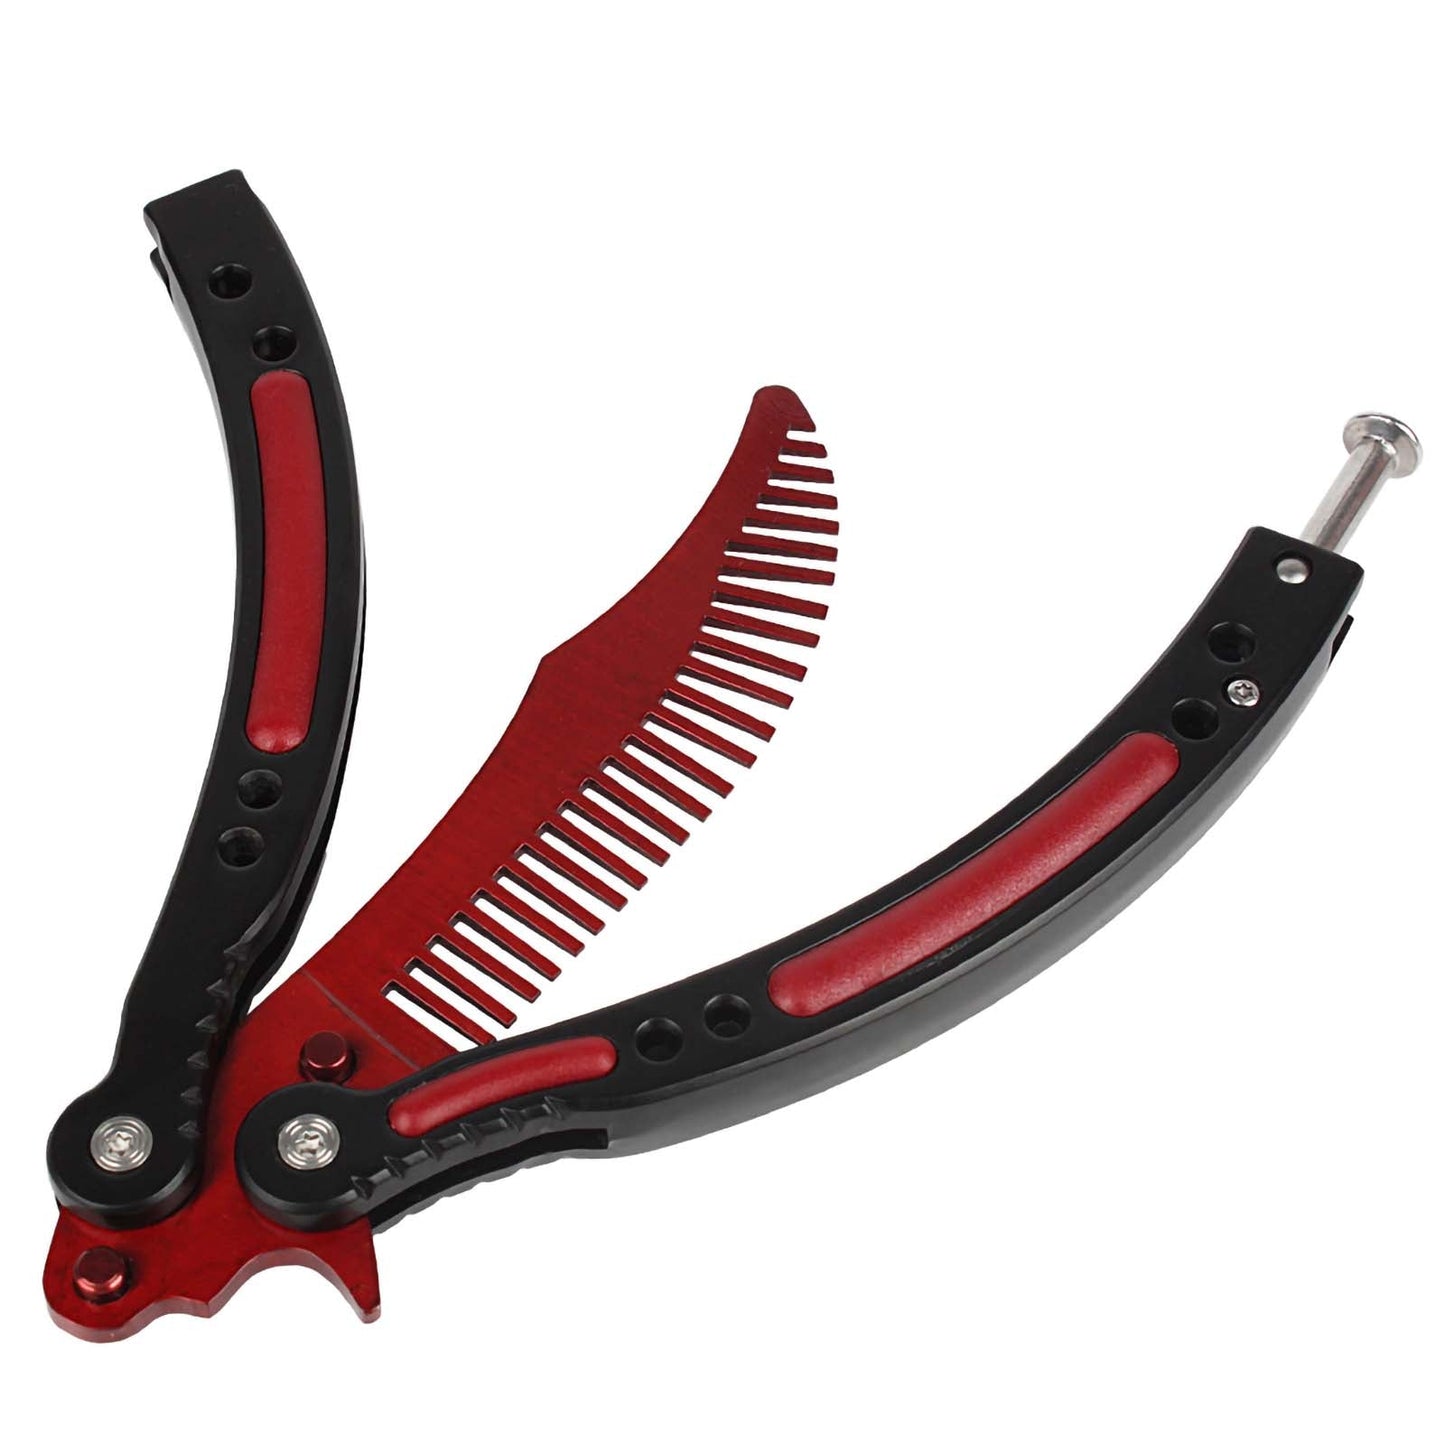 Andux Balisong Comb Style Foldable Curved Flip Trick Practice Tool CS/HDD38(Only Available in European Countries)